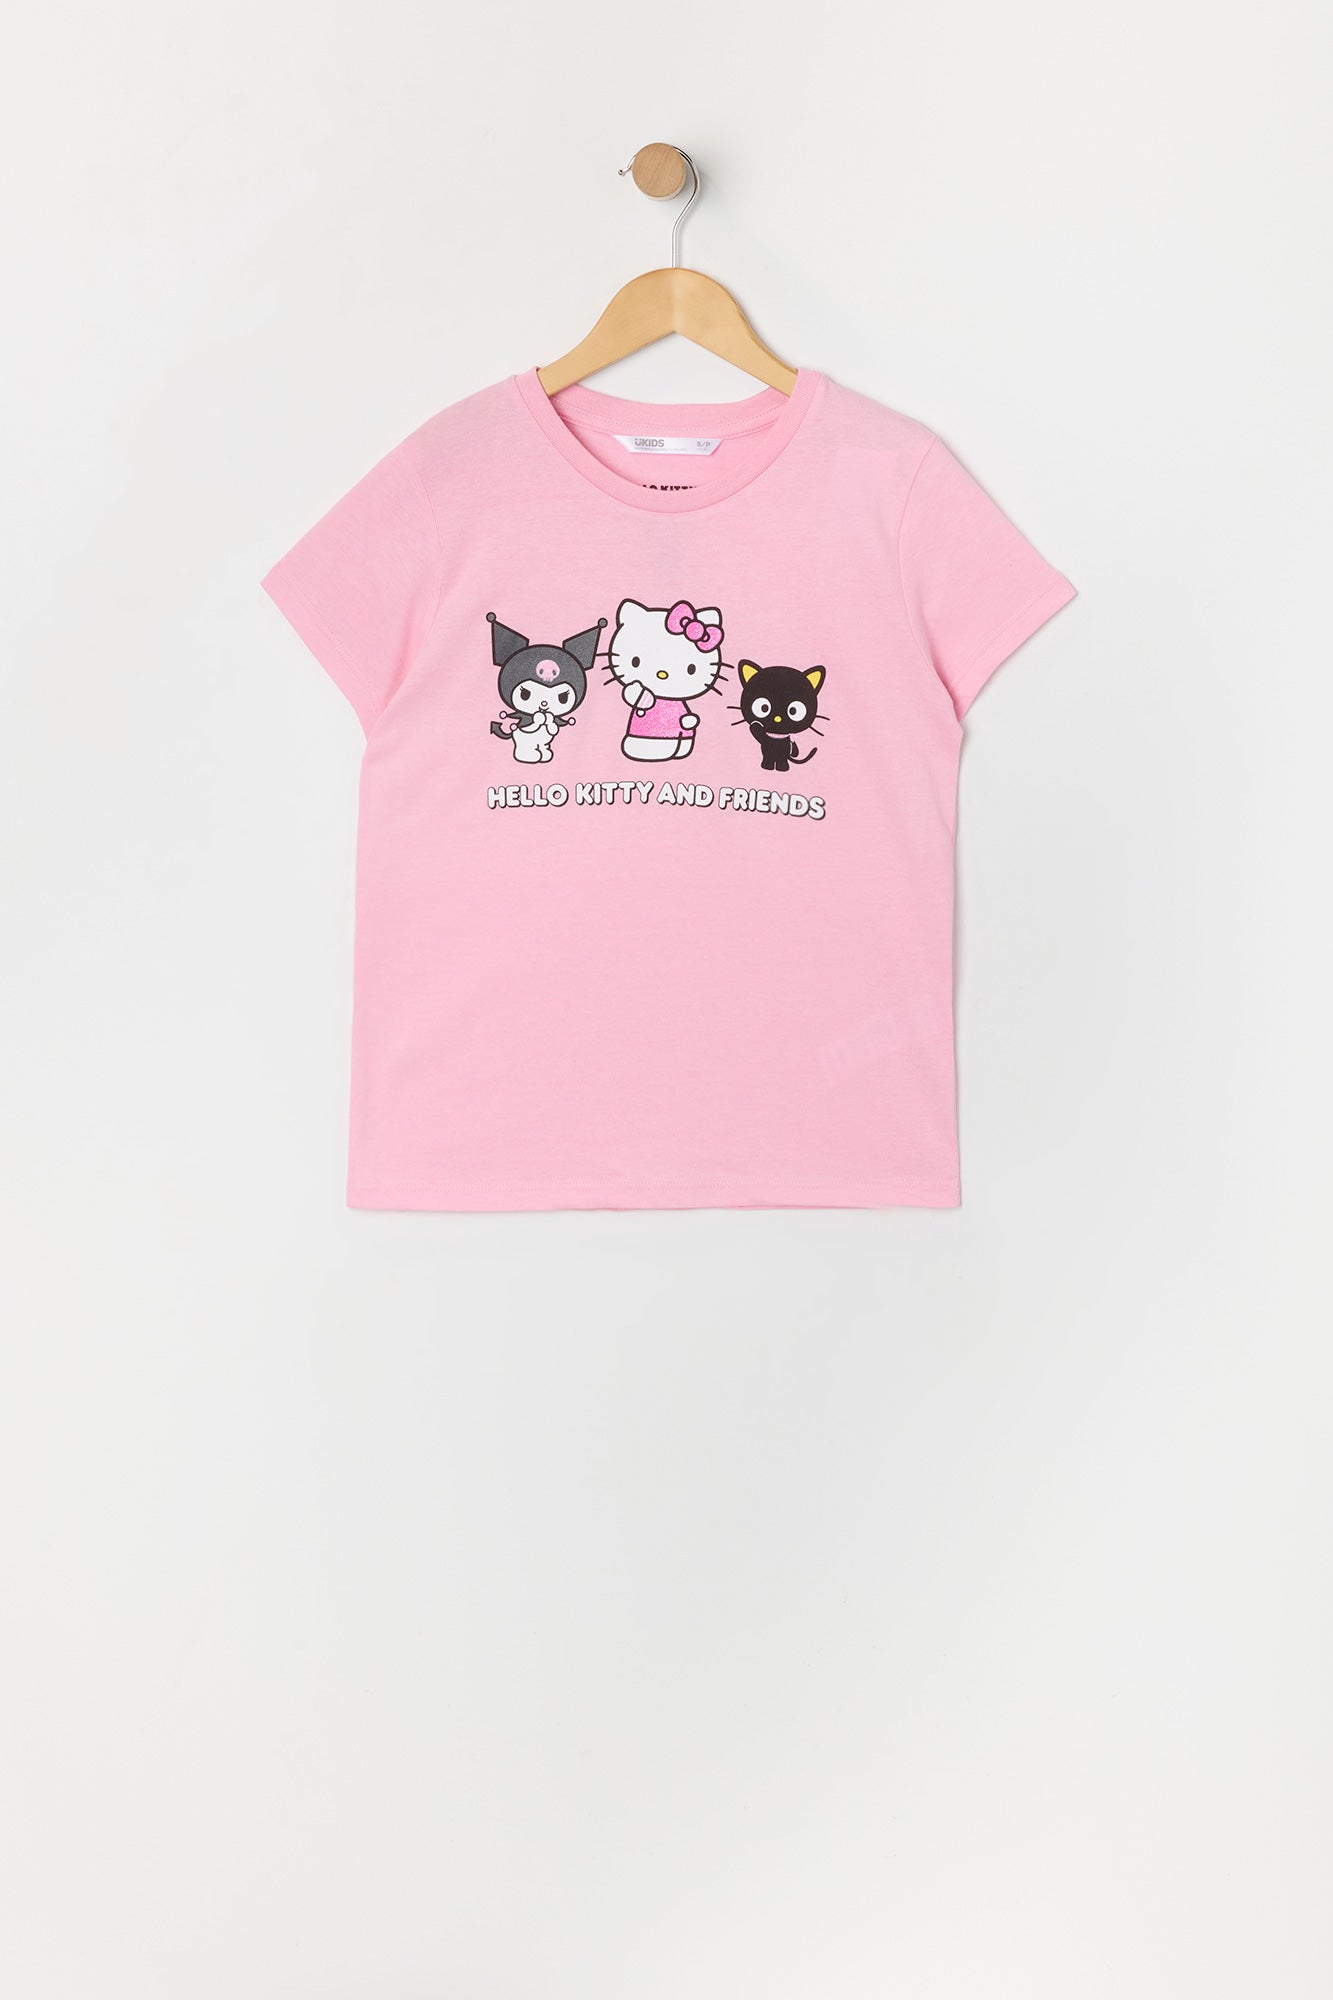 Girls Hello Kitty and Friends Pink Graphic T-Shirt